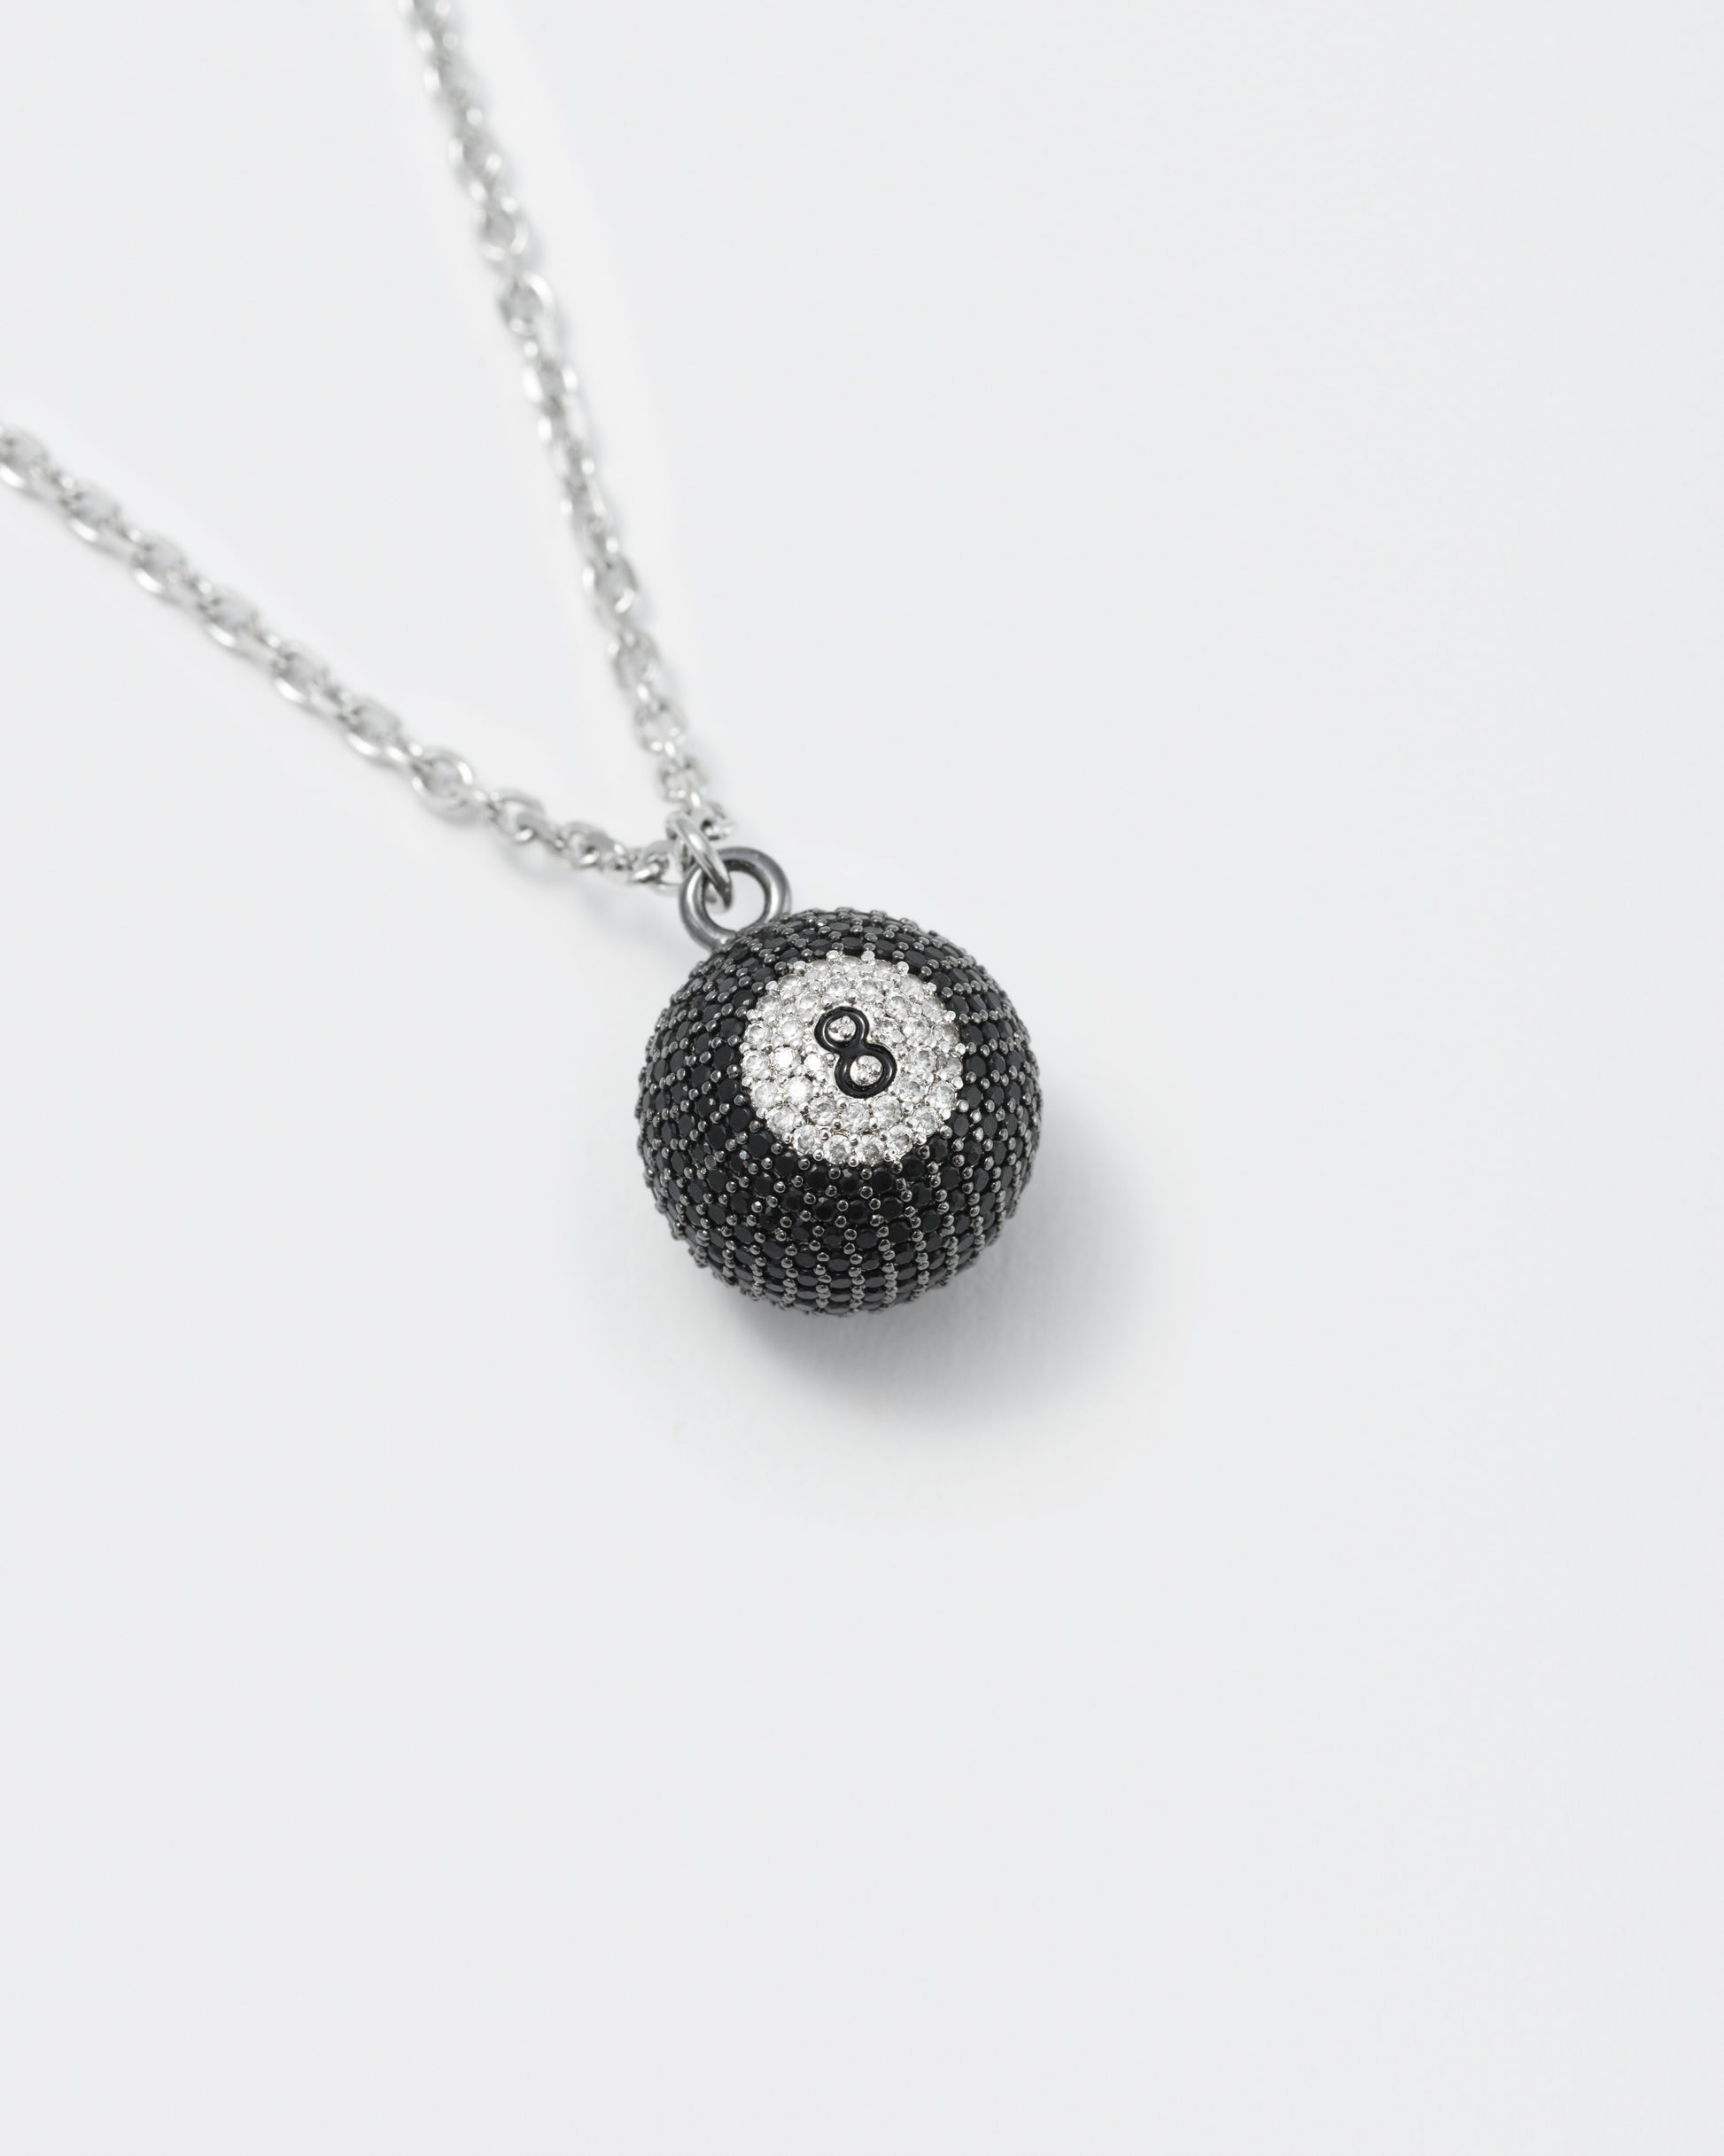 detail of eight ball pendant necklace with deep black PVD coating and hand-set micropavé stones in black and diamond white. Hand painted number 8 in black enamel. 2mm cable chain and lobster clasp with metal logo tag